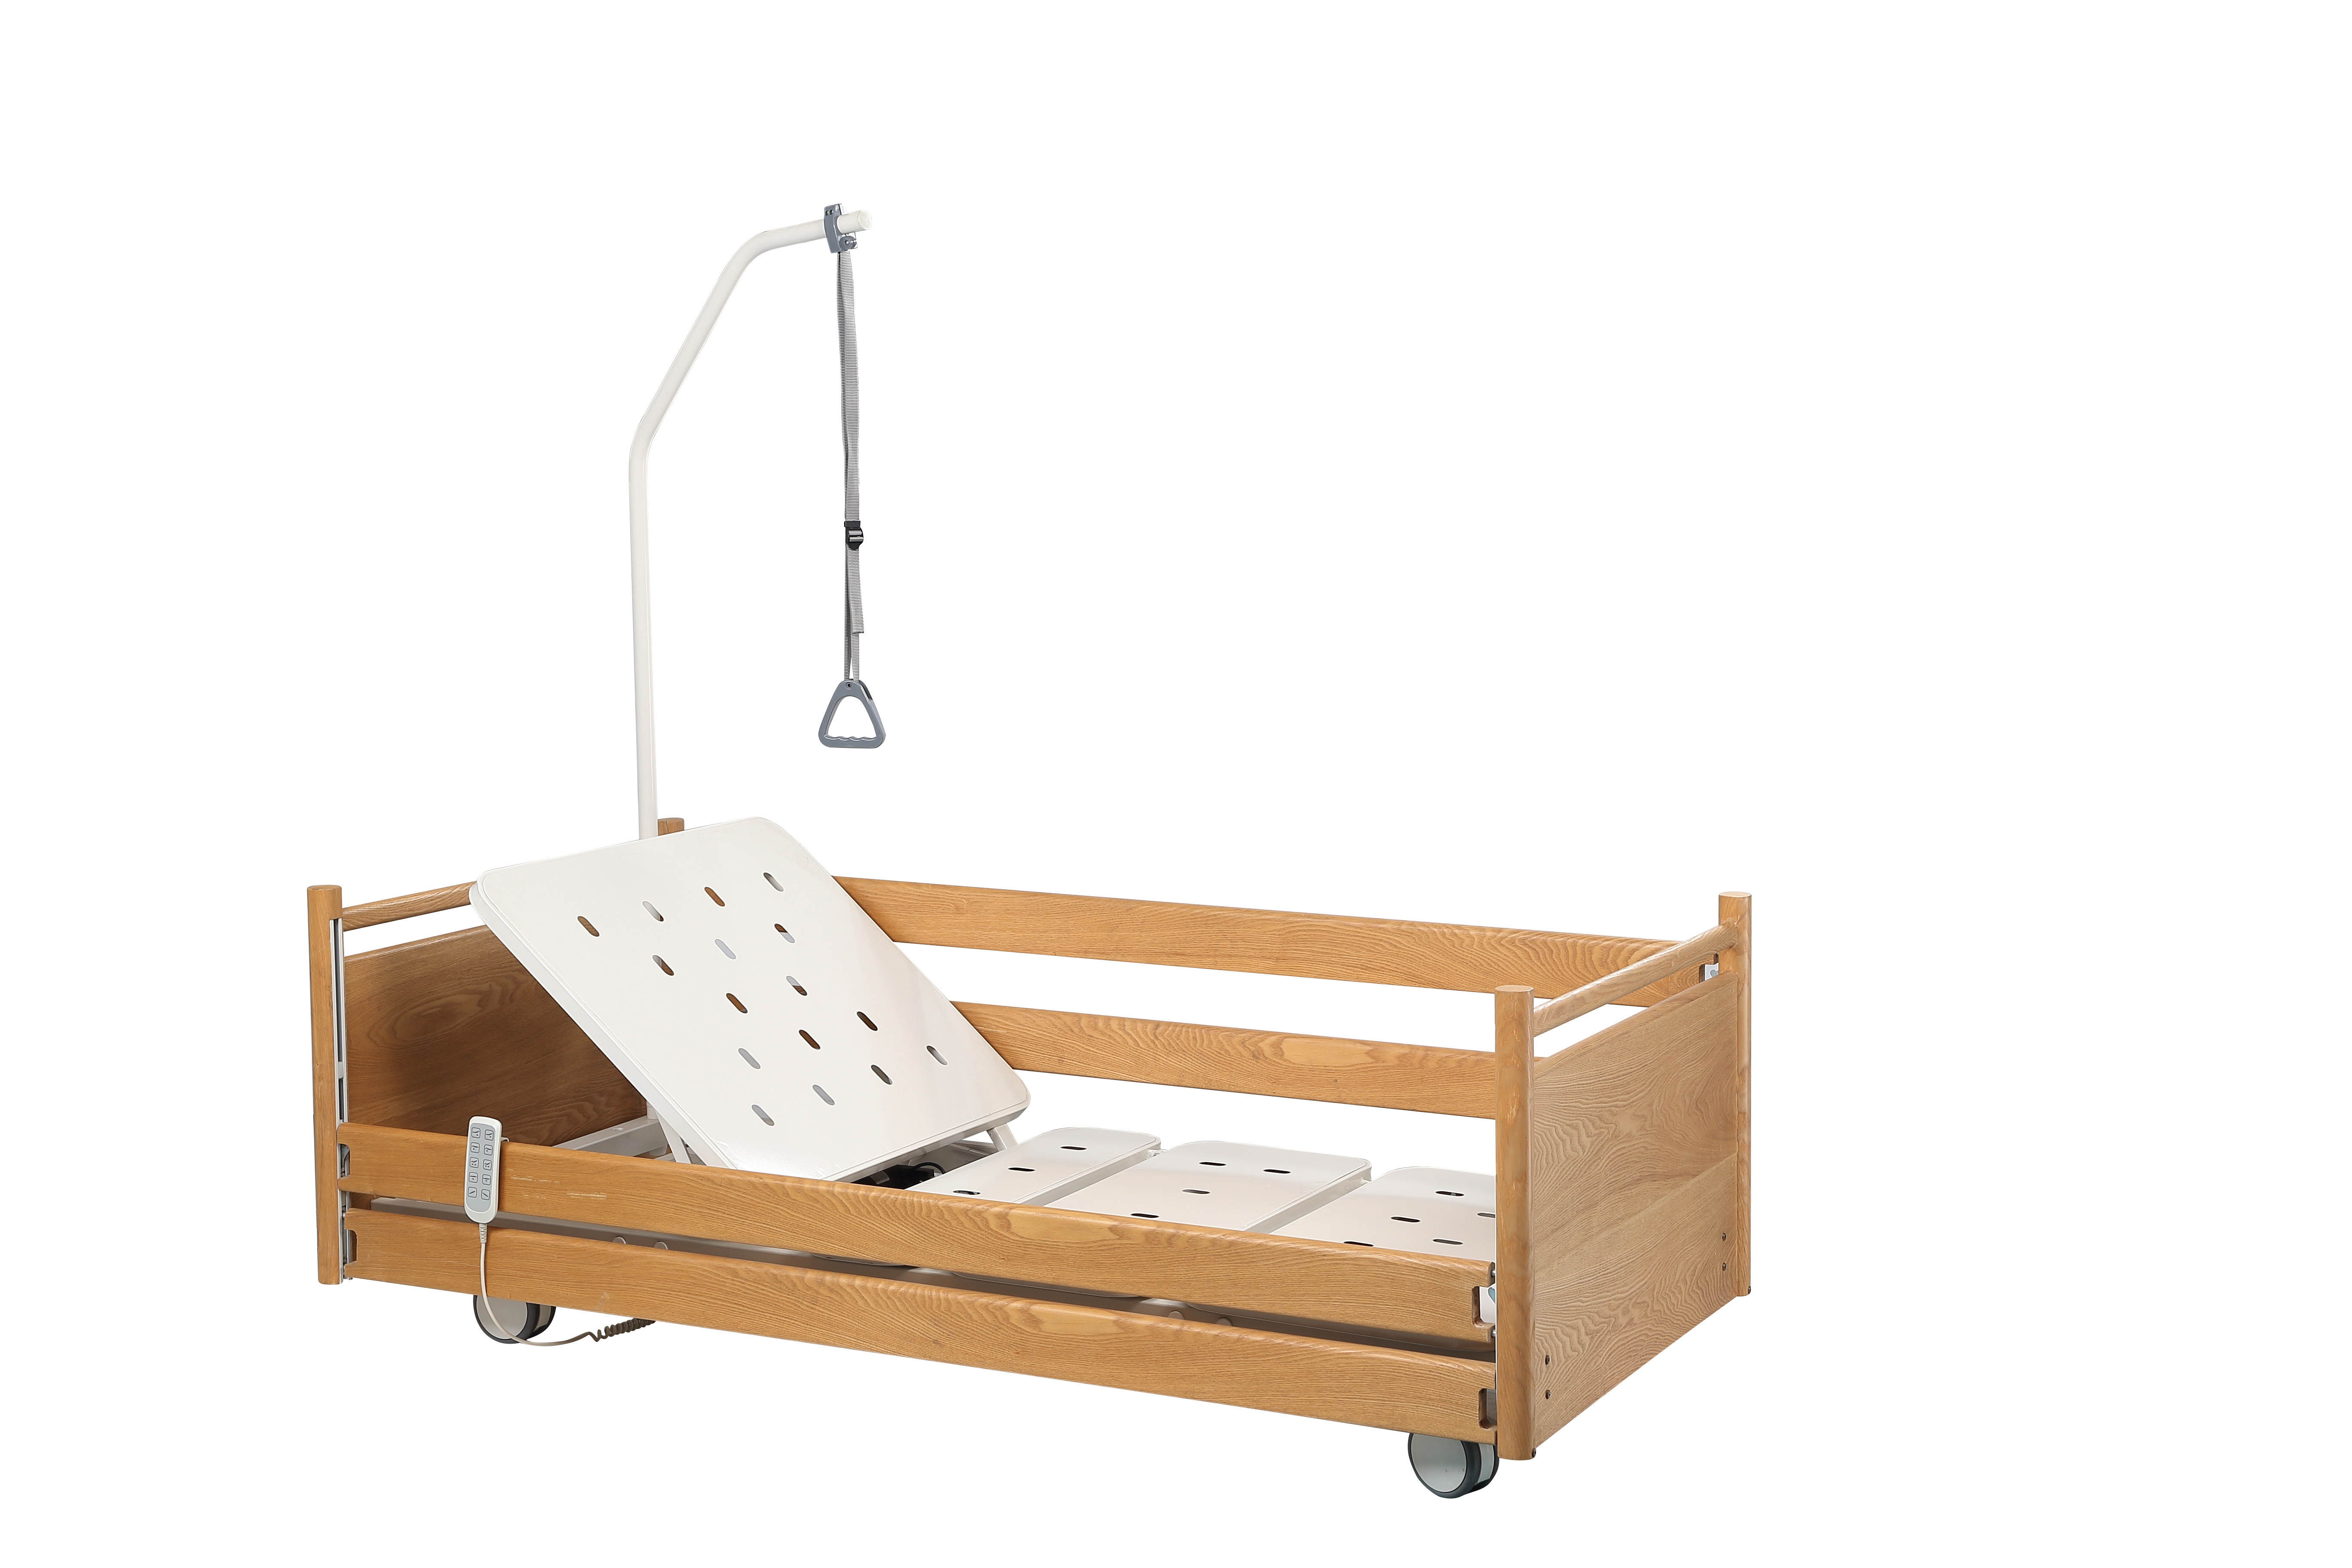 Cheap 2190 * 970 * 300 - 760mm Home Care Bed For Paralysis Patient Wooden Handrails for sale